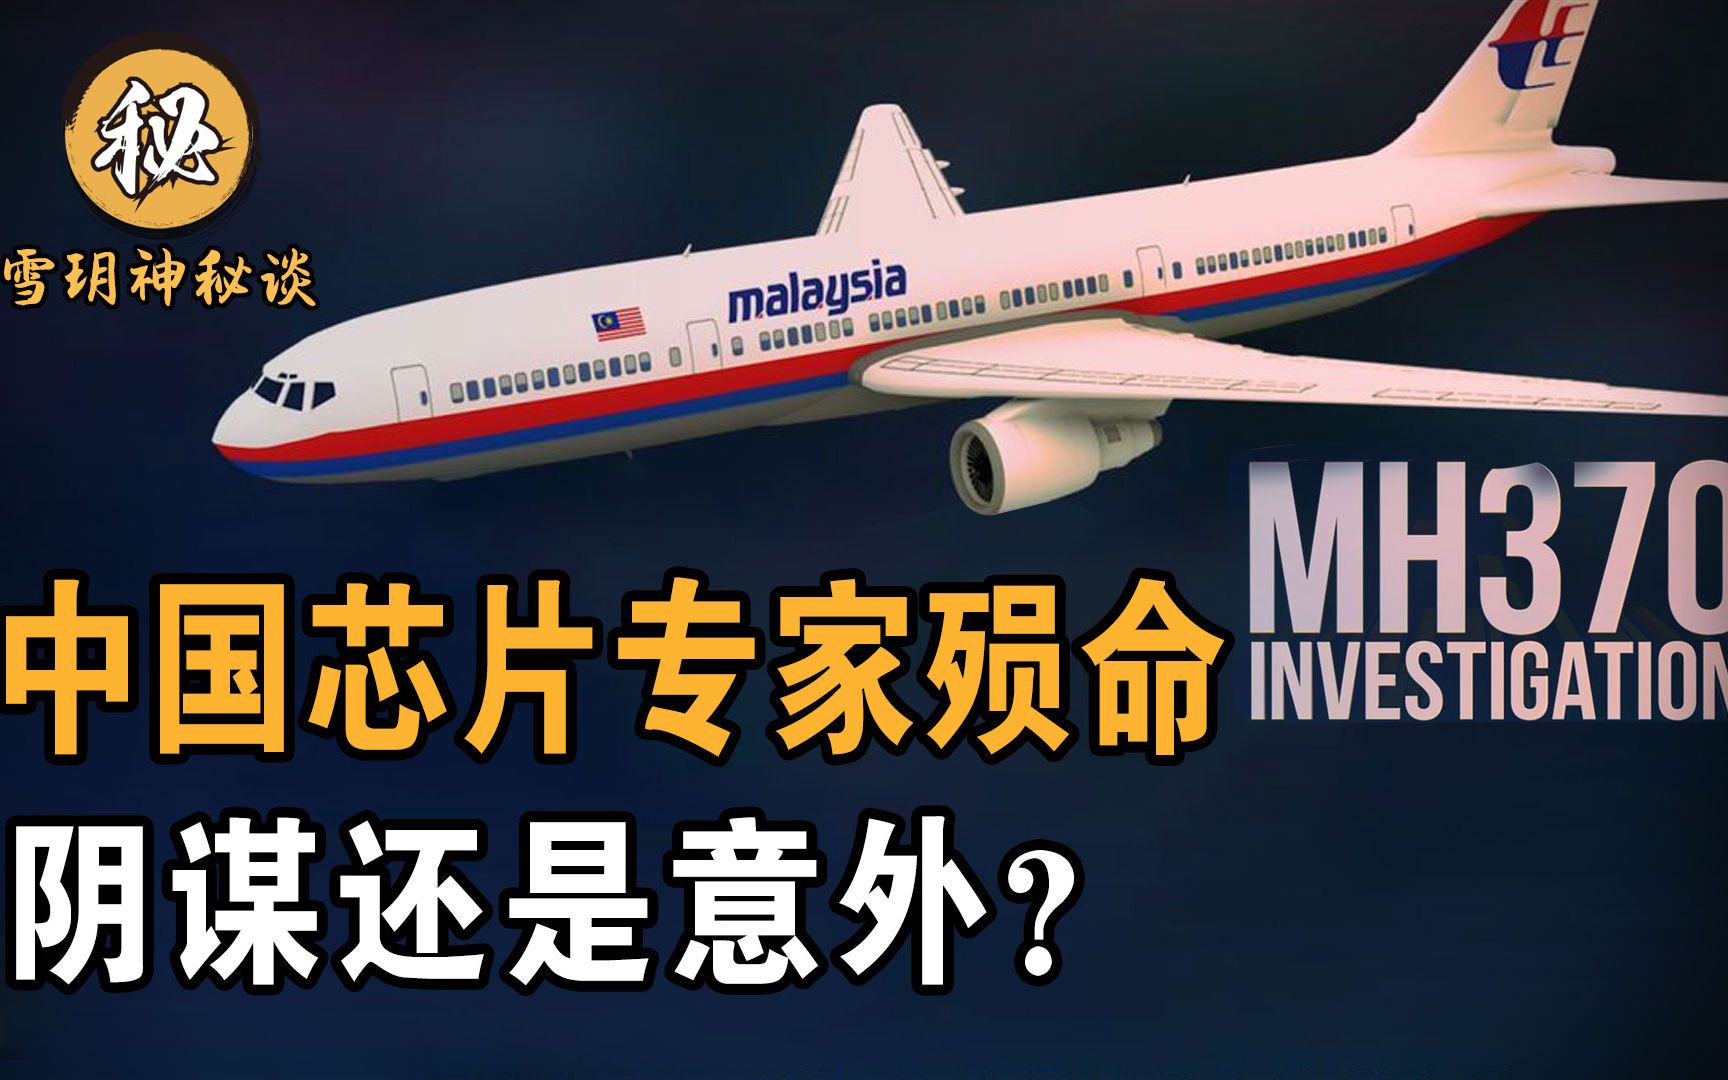 MH370 found after 7 years? Are the passengers still alive ...